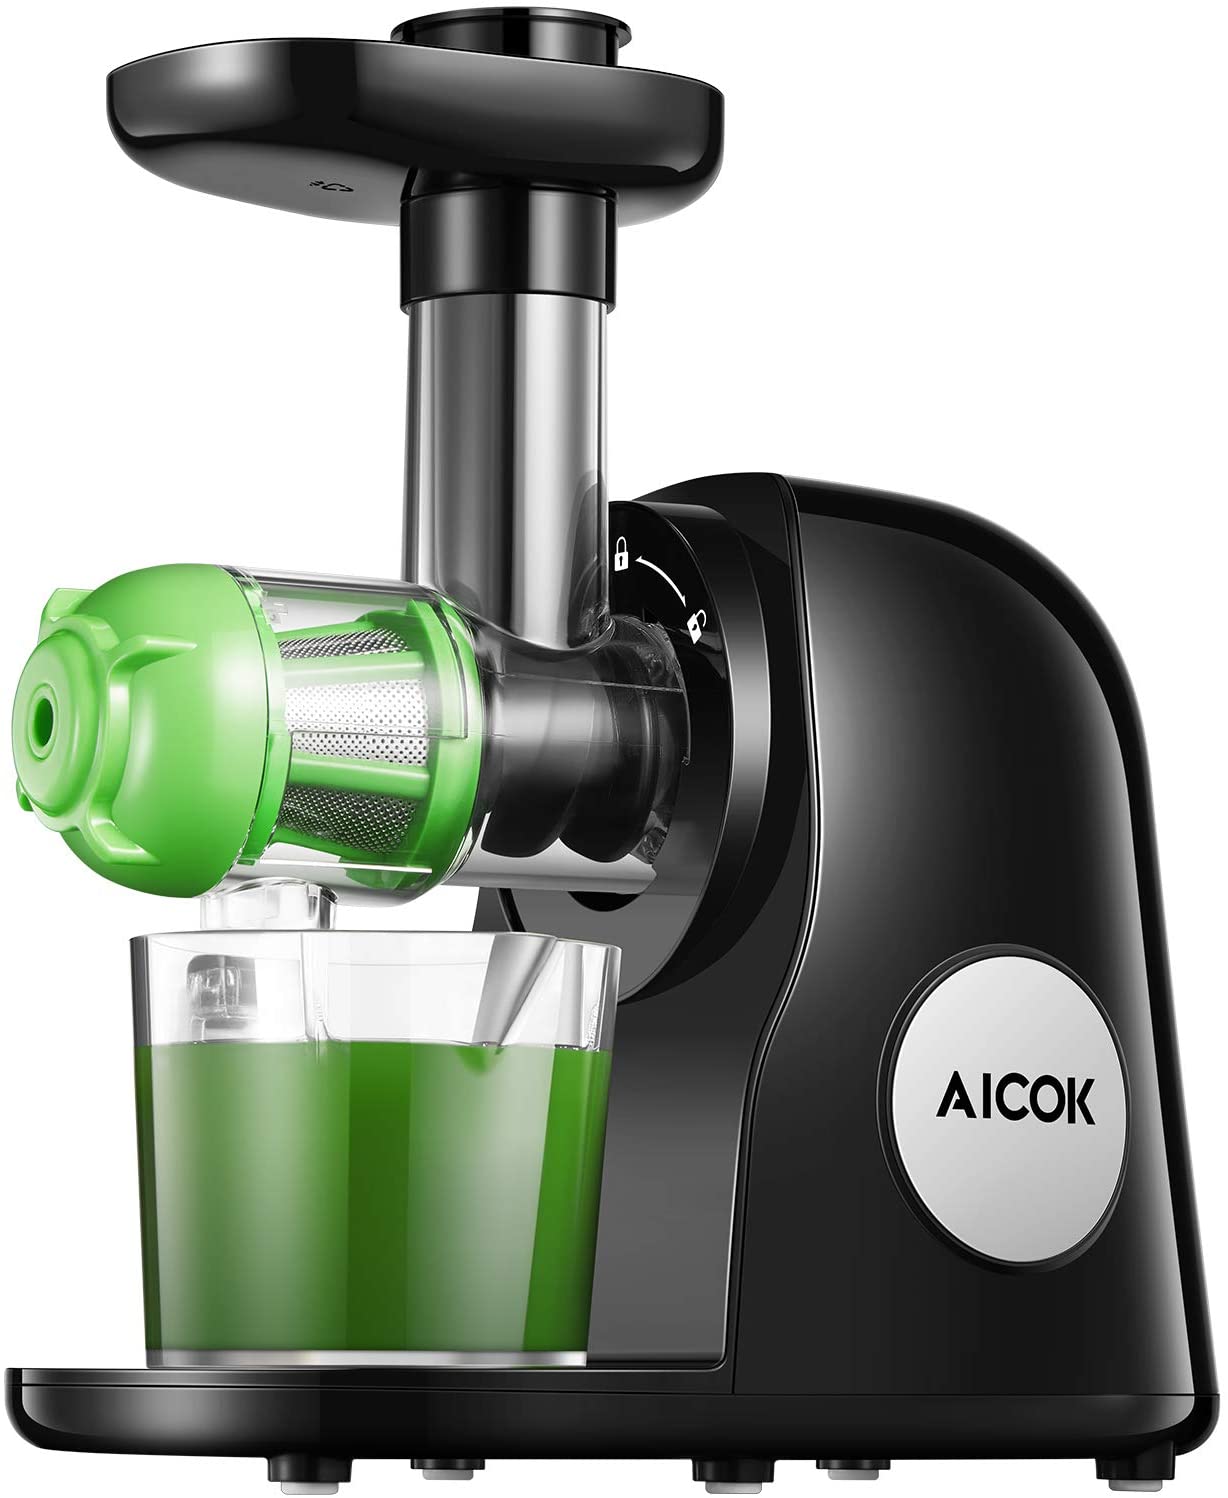 Aicok Juicer Machines, Slow Masticating Juicer Extractor Easy to Clean, Cold Press Juicer with Brush, Juicer with Quiet Motor & Reverse Function, for High Nutrient Fruit & Vegetable Juice - image 1 of 7